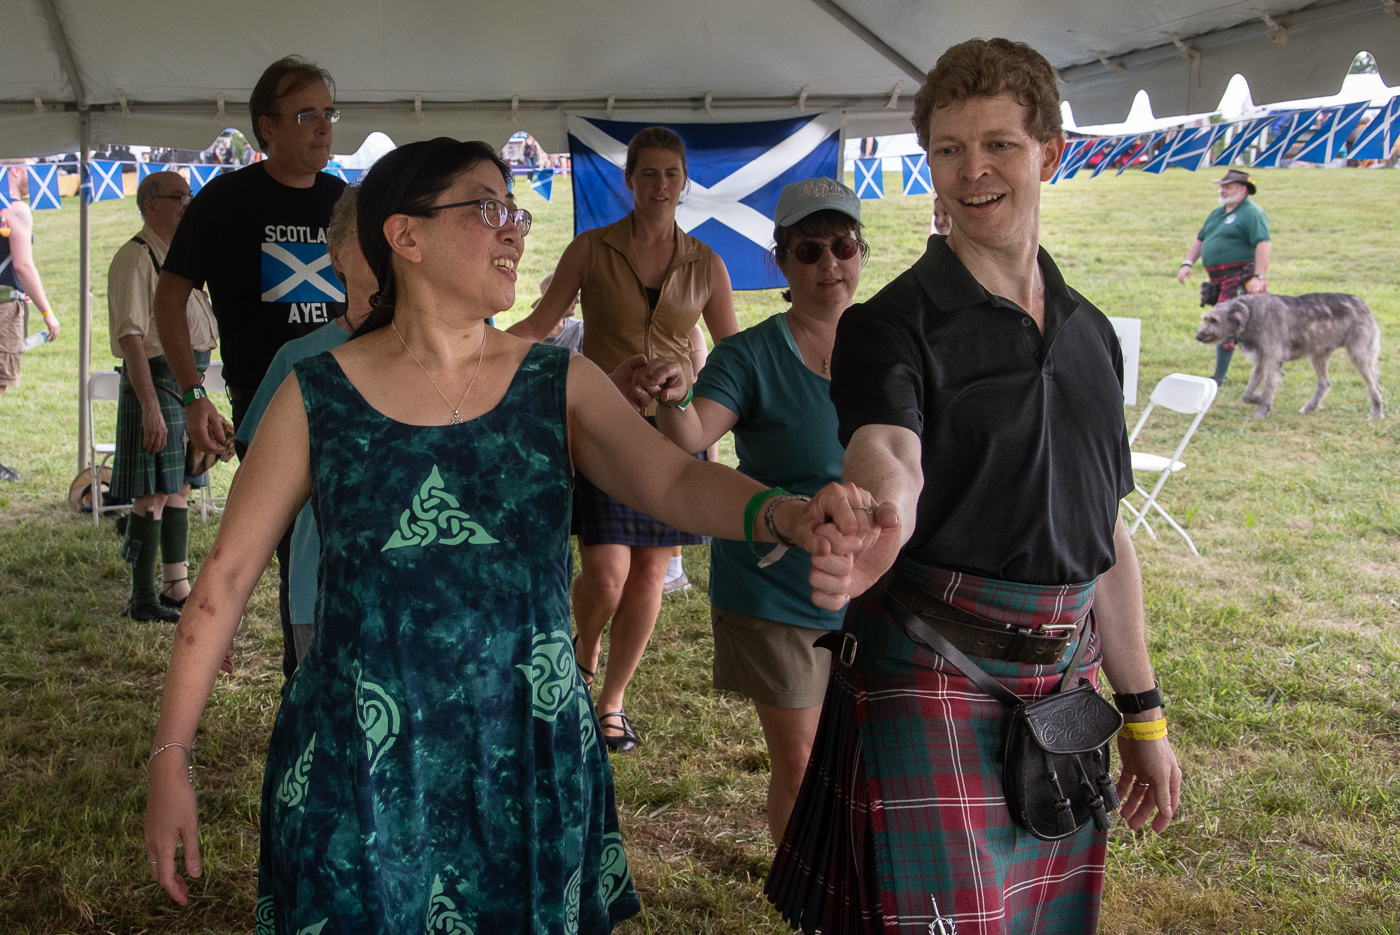 Virginia Scottish Games 2018 - Yvonne and Justin